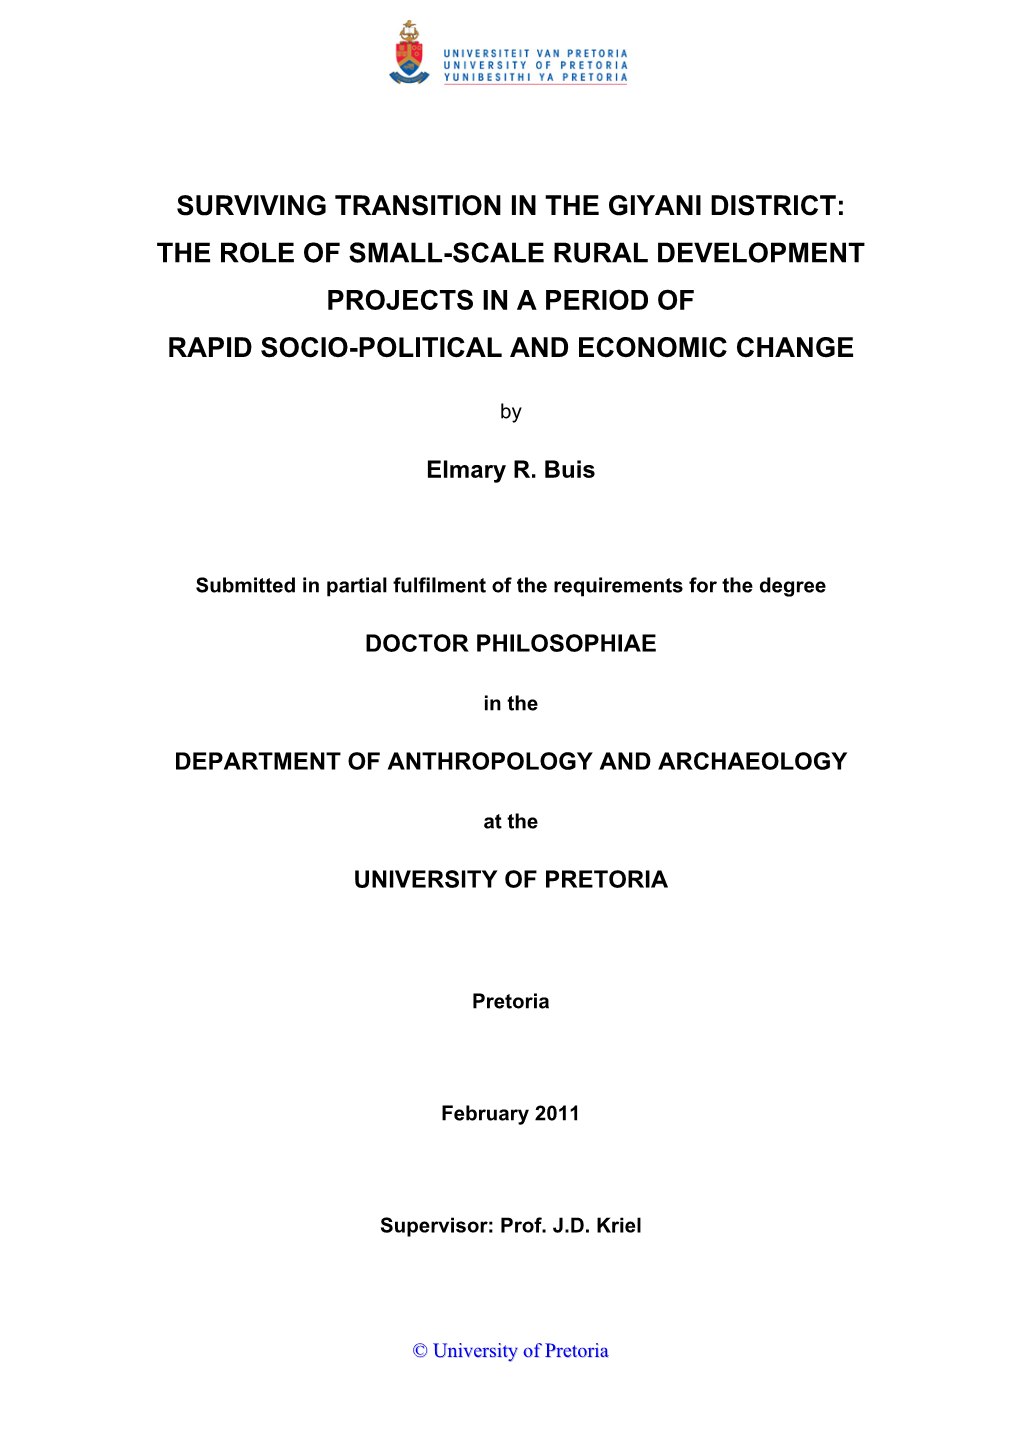 Surviving Transition in the Giyani District: the Role of Small-Scale Rural Development Projects in a Period of Rapid Socio-Political and Economic Change